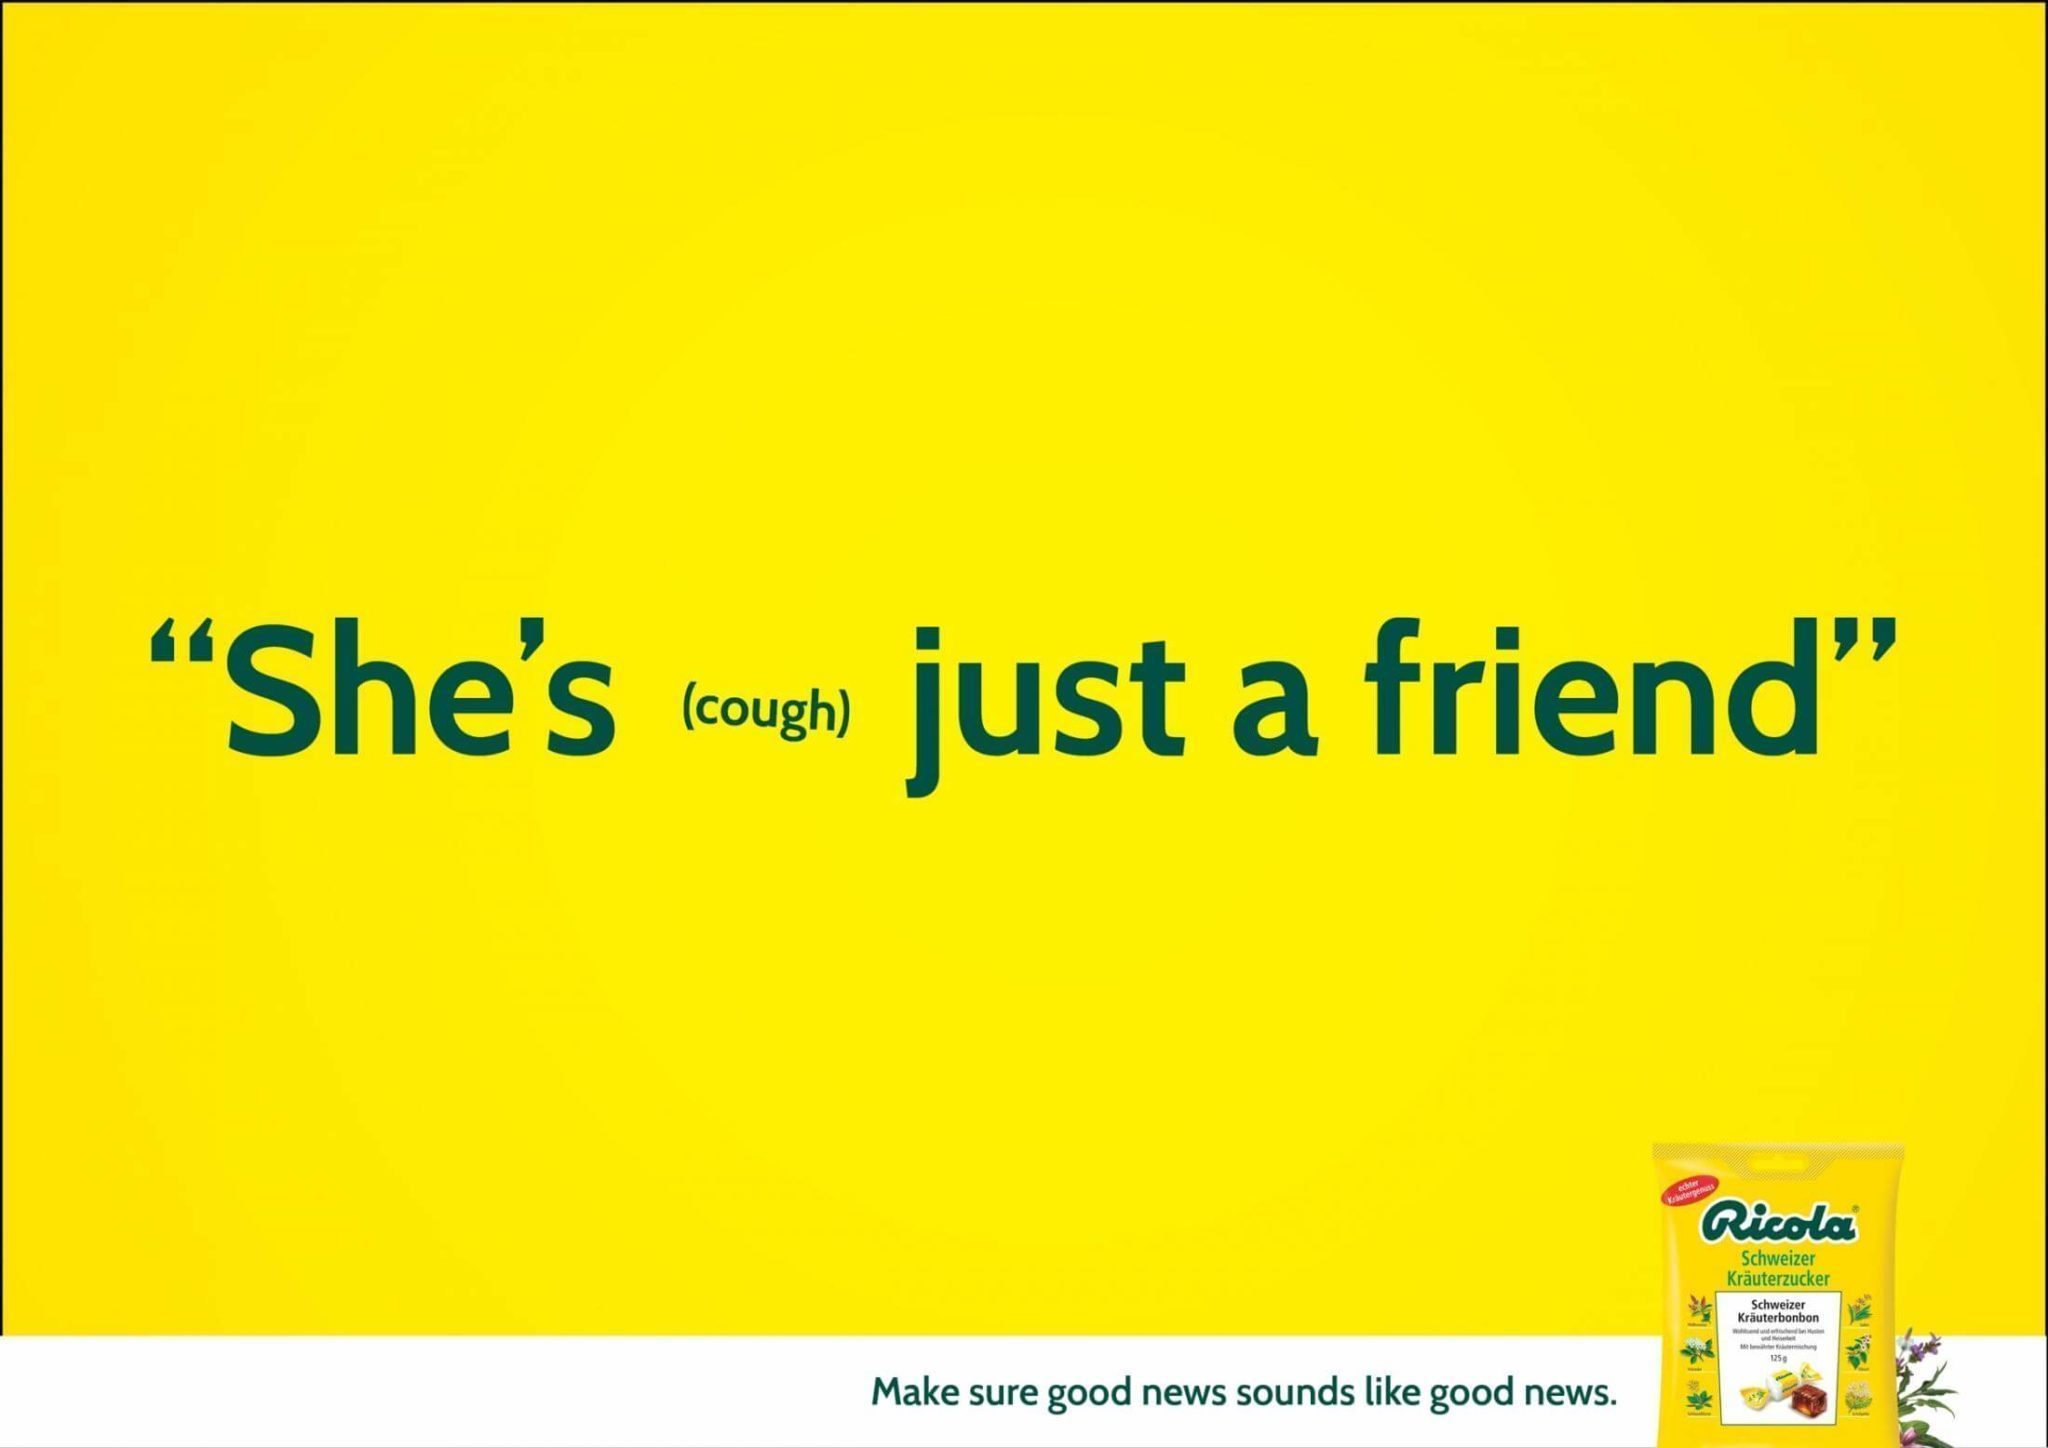 example of edgy copywriting by Ricola saying "She's (cough) just a friend"